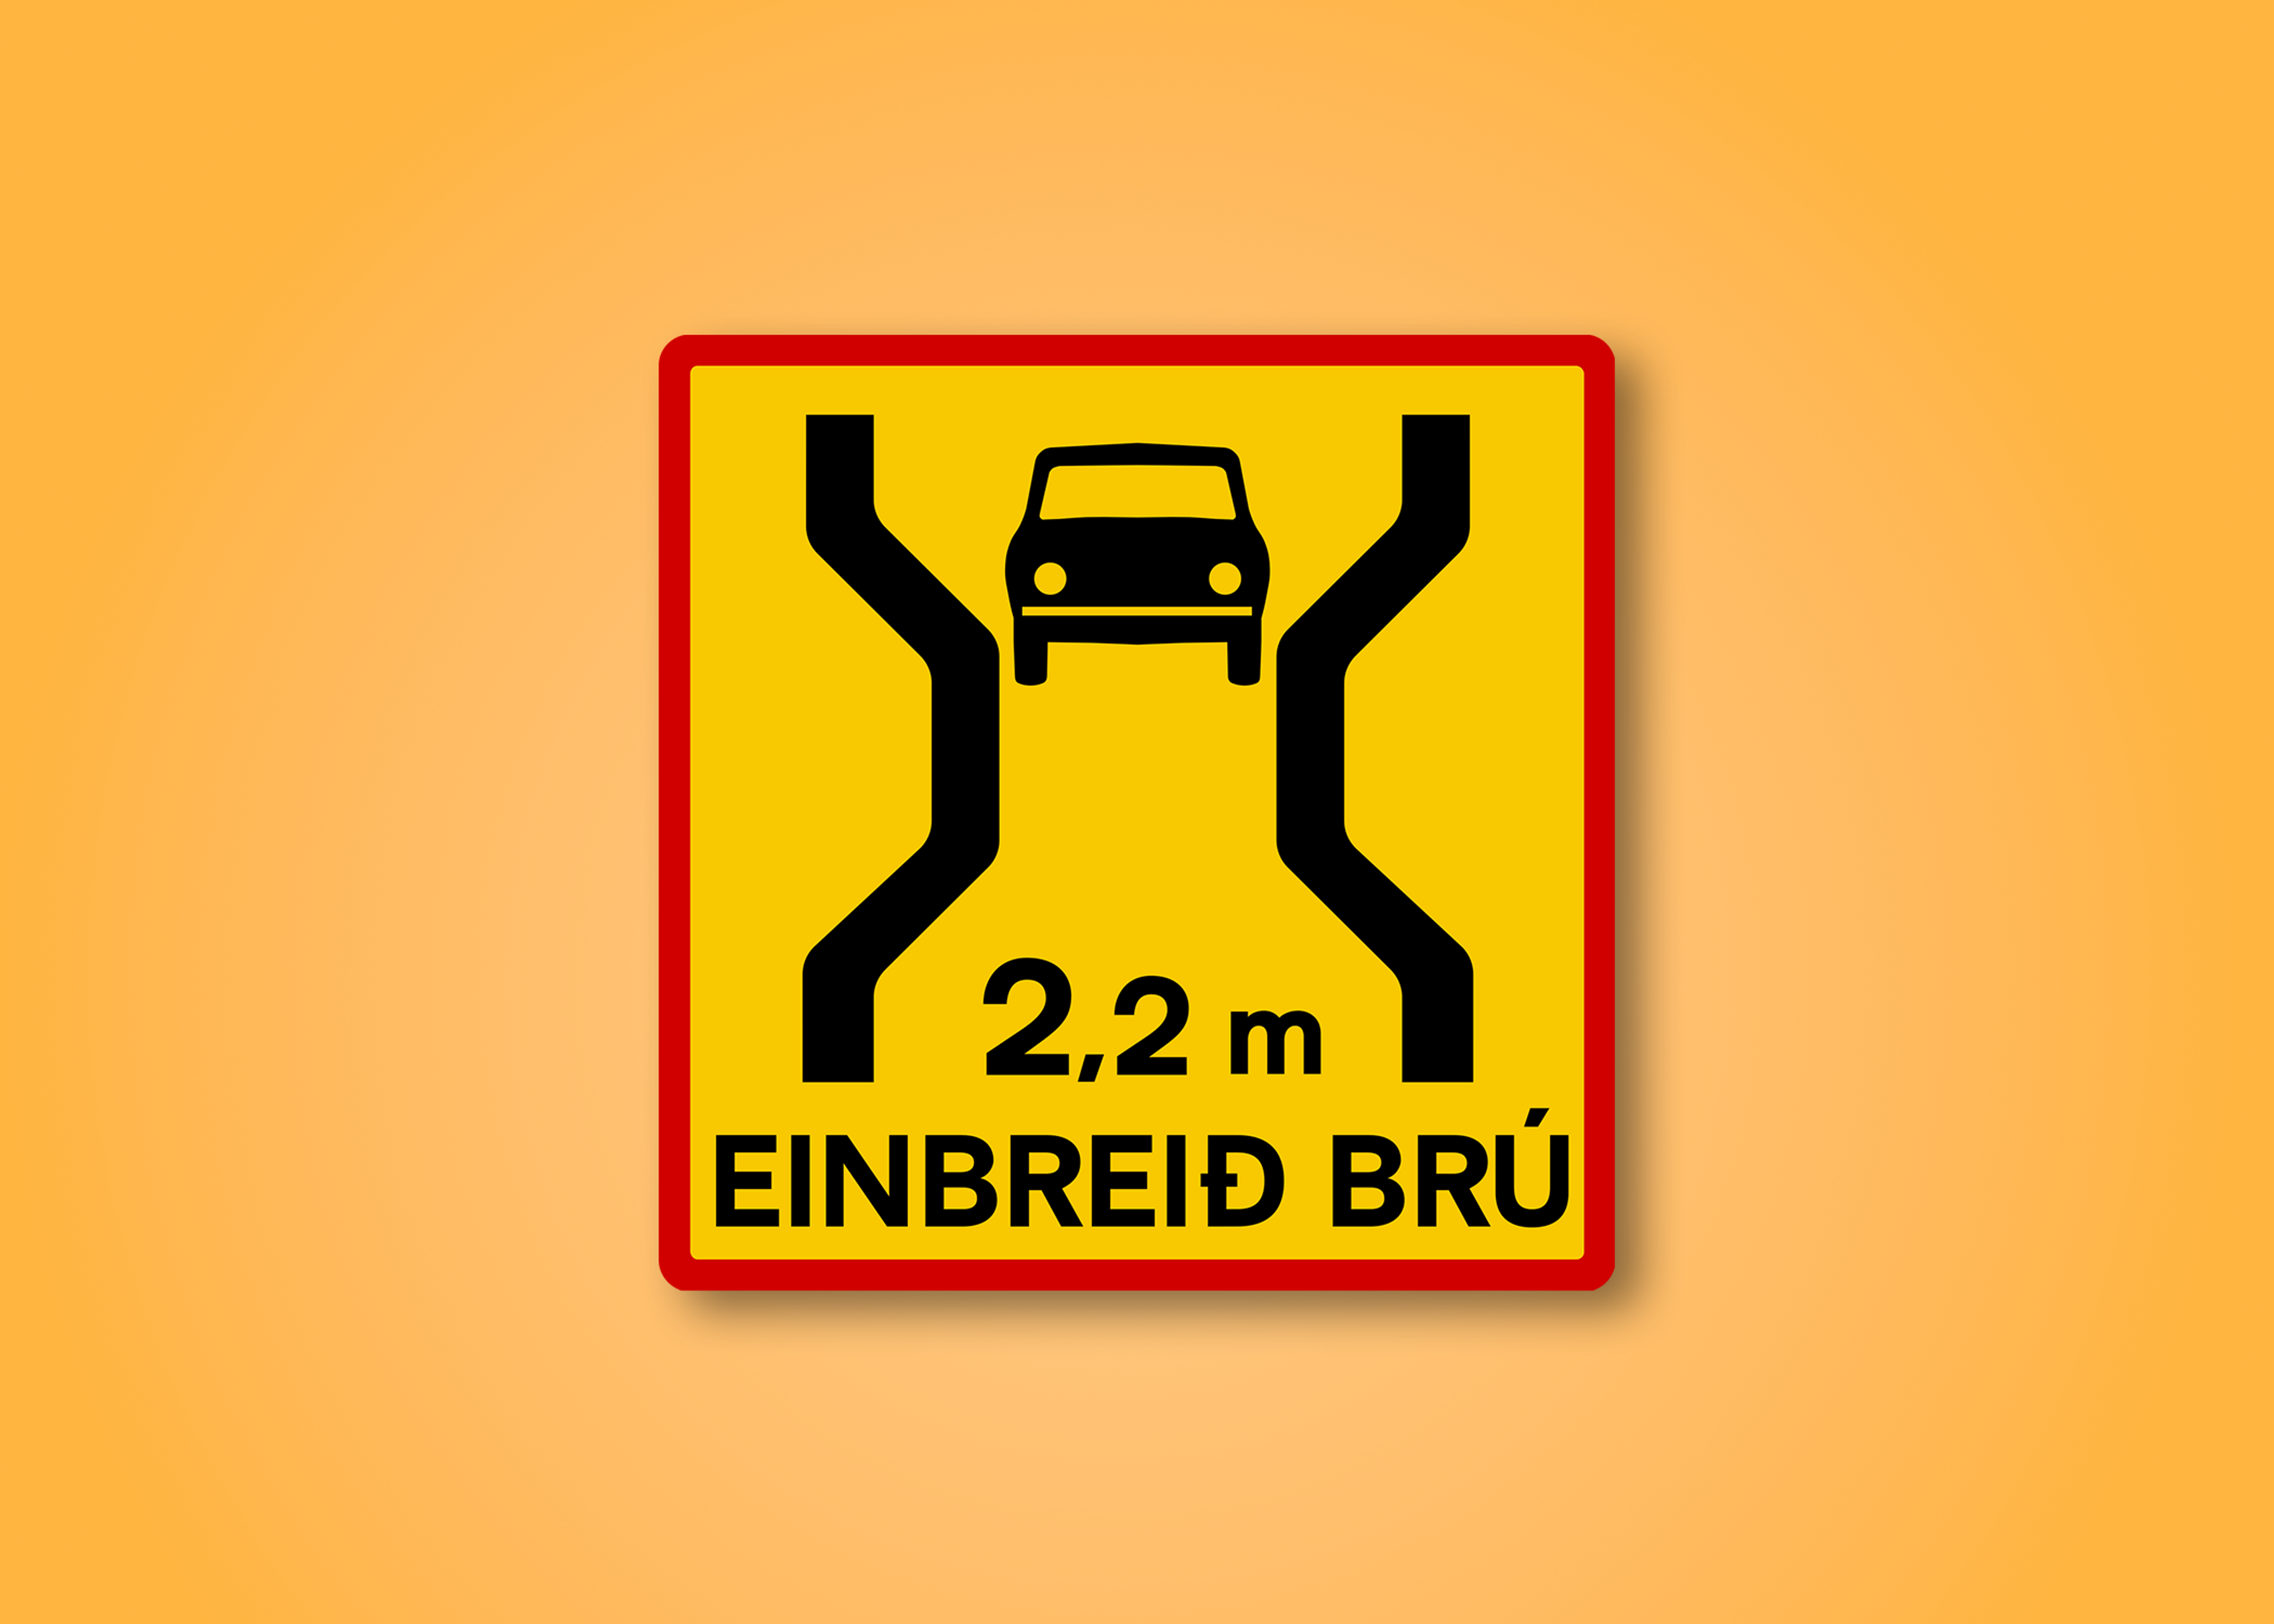 Red and yellow box road sign with a rental car driving a bridge in the middle. This road sign means One-Lane Bridge ahead.